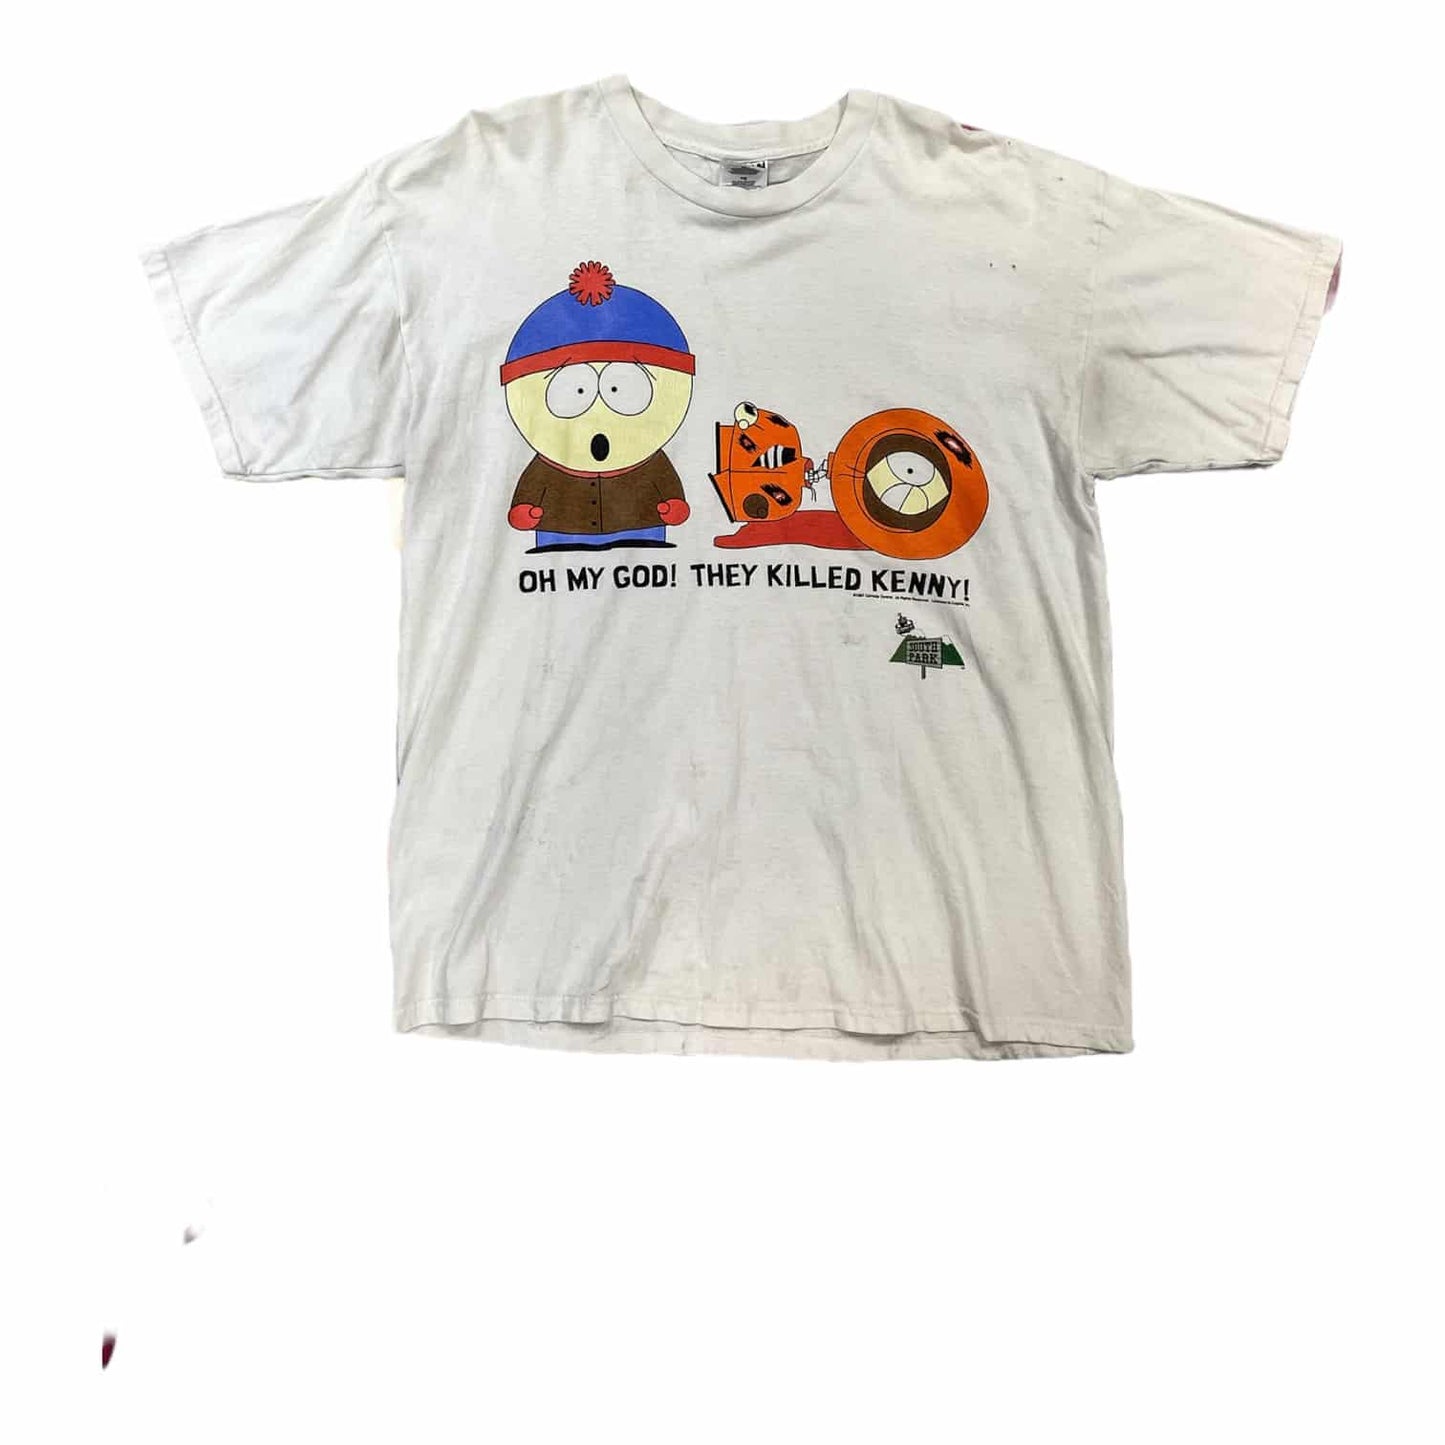 1997 South Park Comedy Central vintage graphic tee